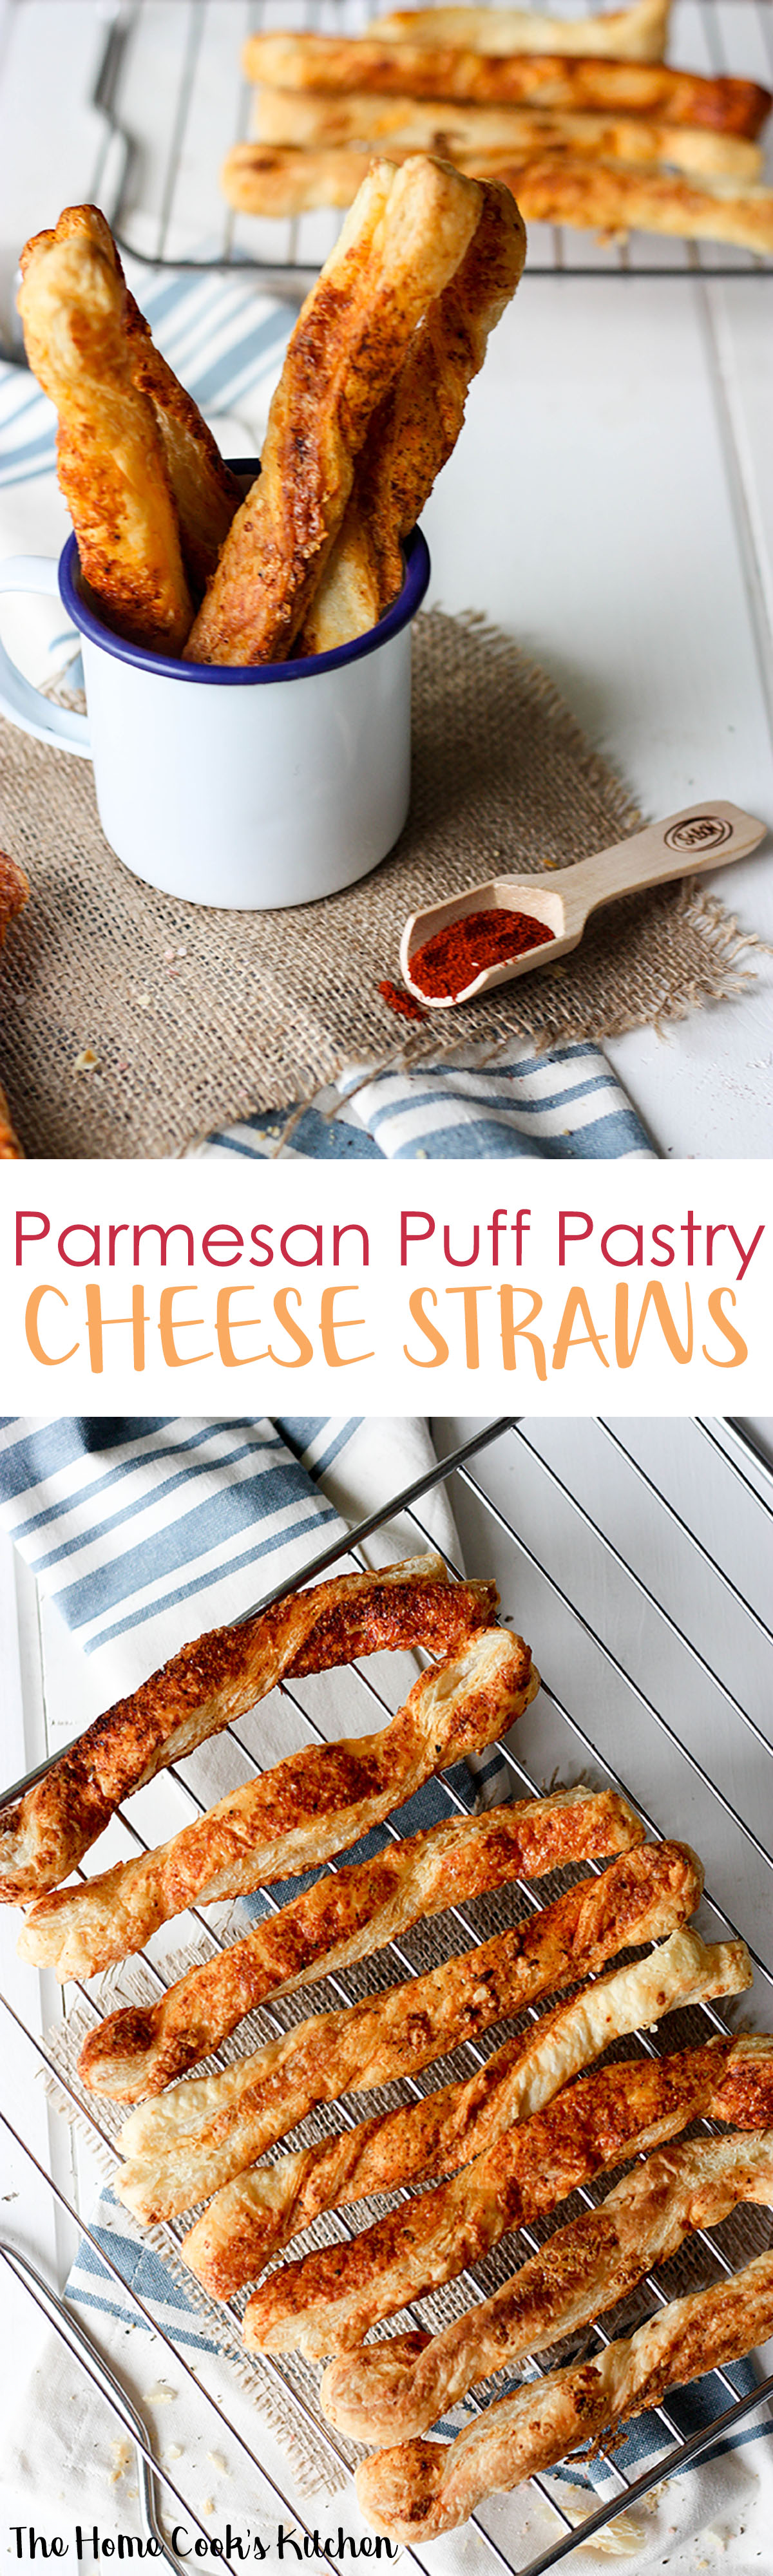 Parmesan Puff Pastry Cheese straws - perfect for an easy appetizer www.thehomecookskitchen.com